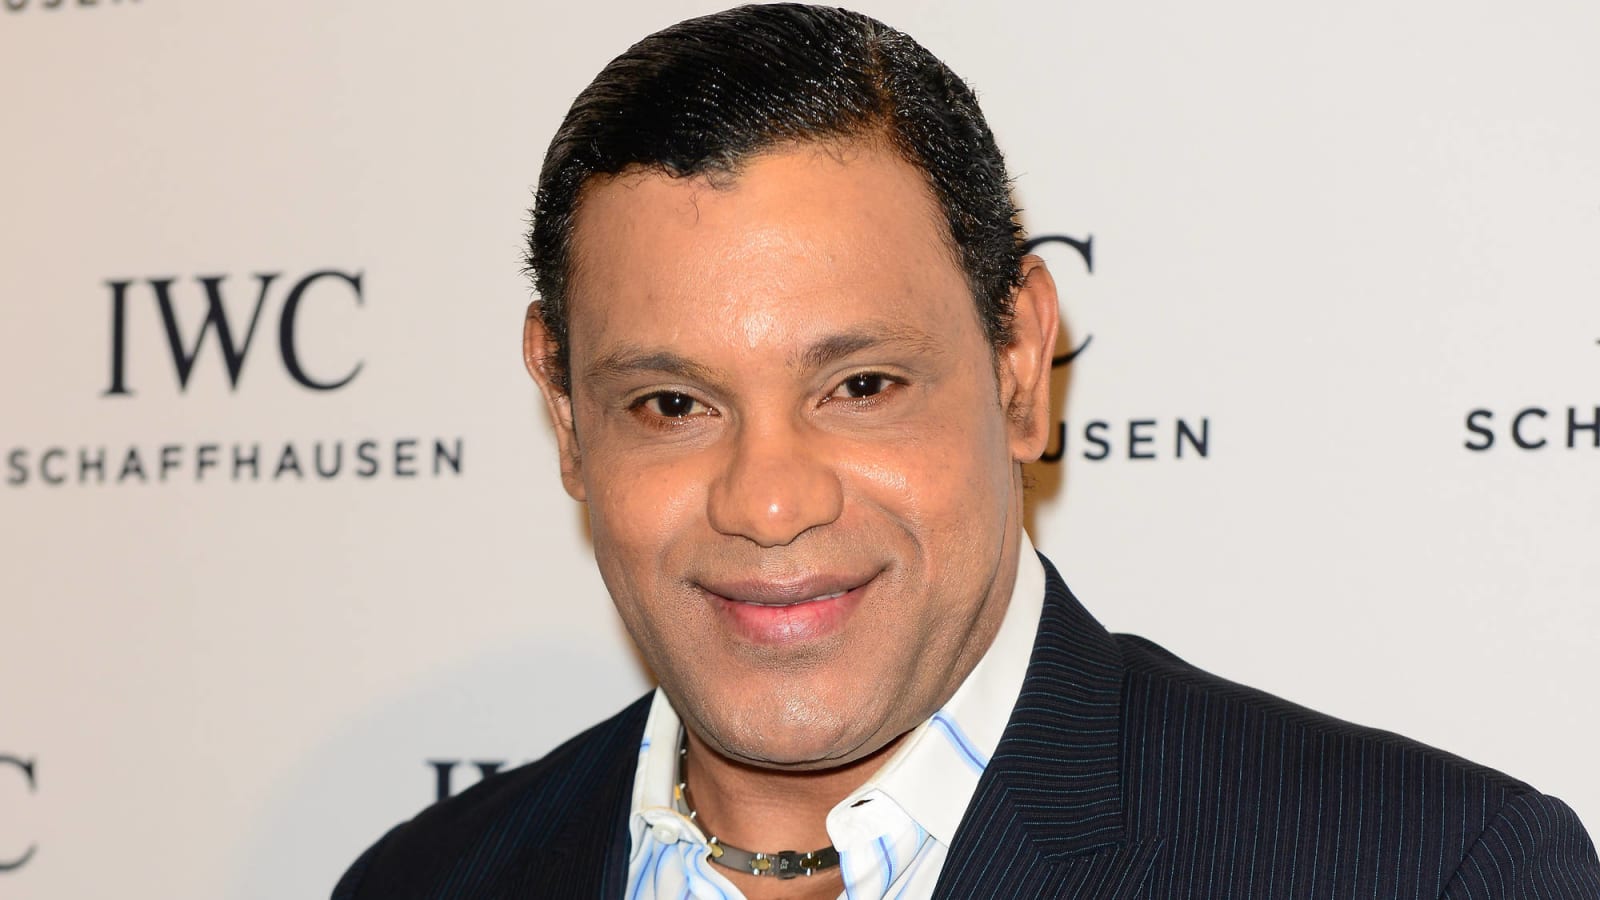 Sammy Sosa blows off negative reactions to his altered appearance